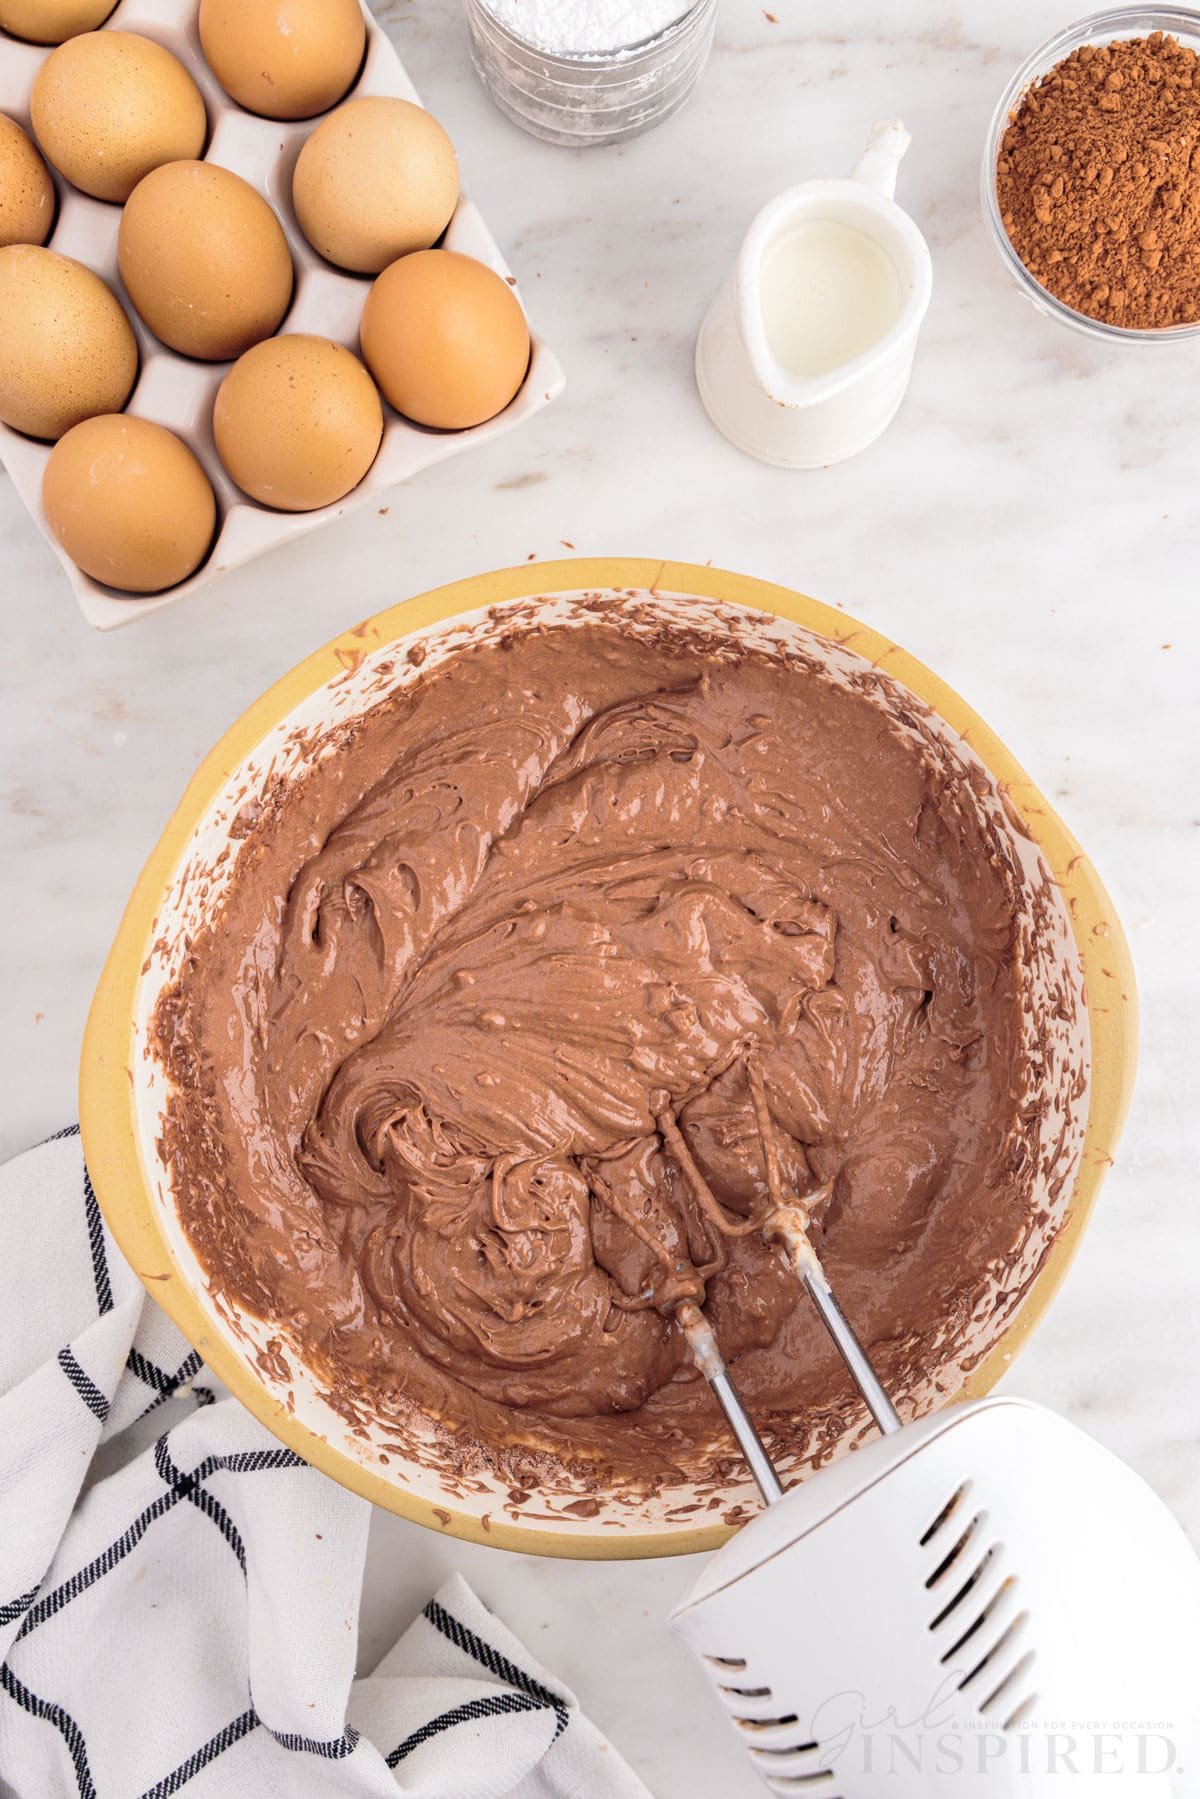 Bowl of chocolate cake mix batter with electric beater, tray of eggs, checkered linen, small bowl of cocoa powder, small jug of milk, jug of sour cream, on a marble countertop.